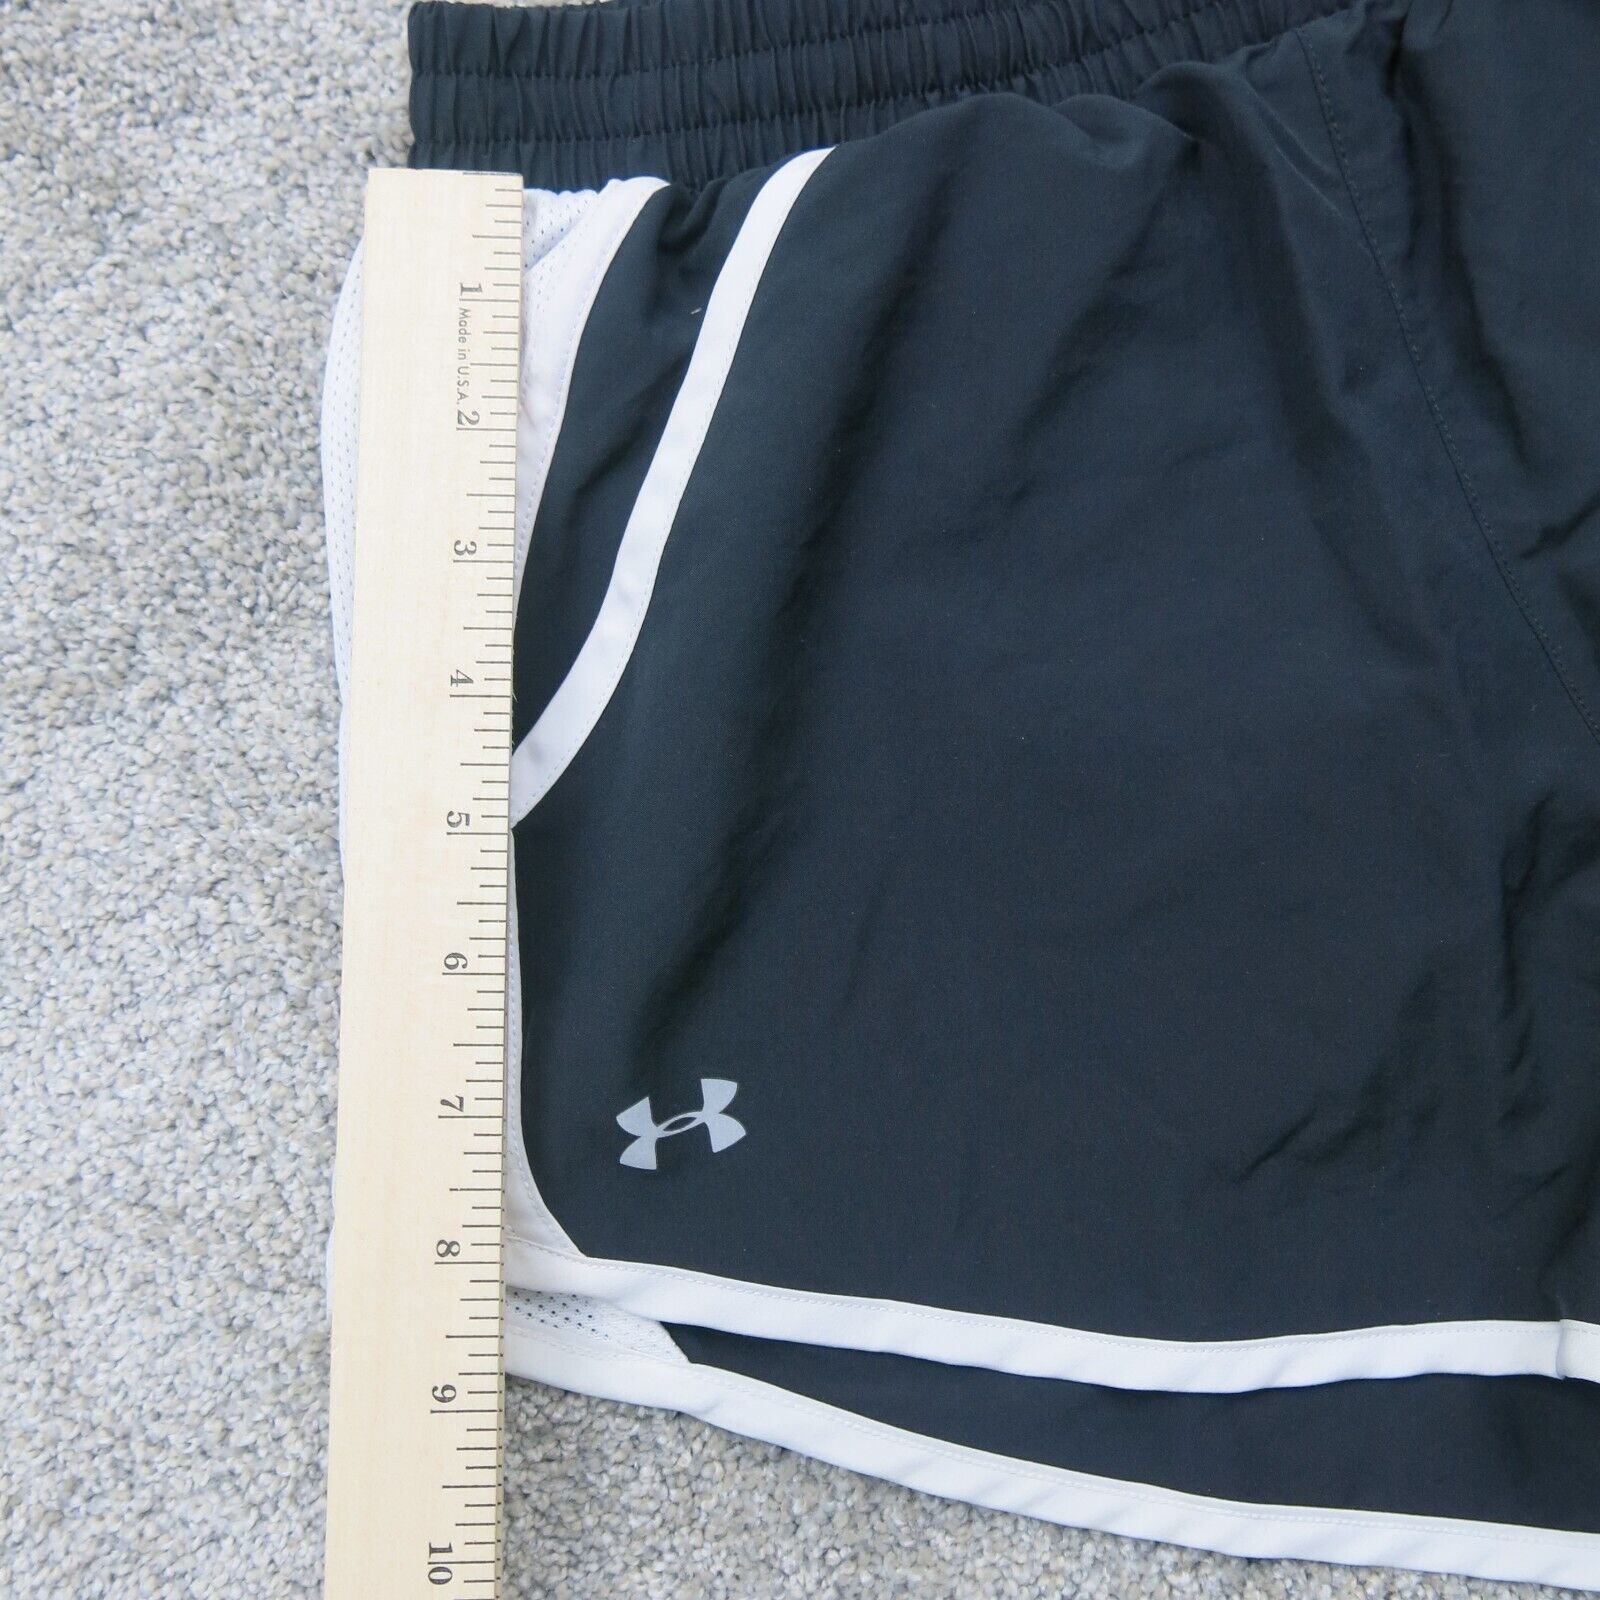 Under Armour Womens Mid Rise Shorts - Black